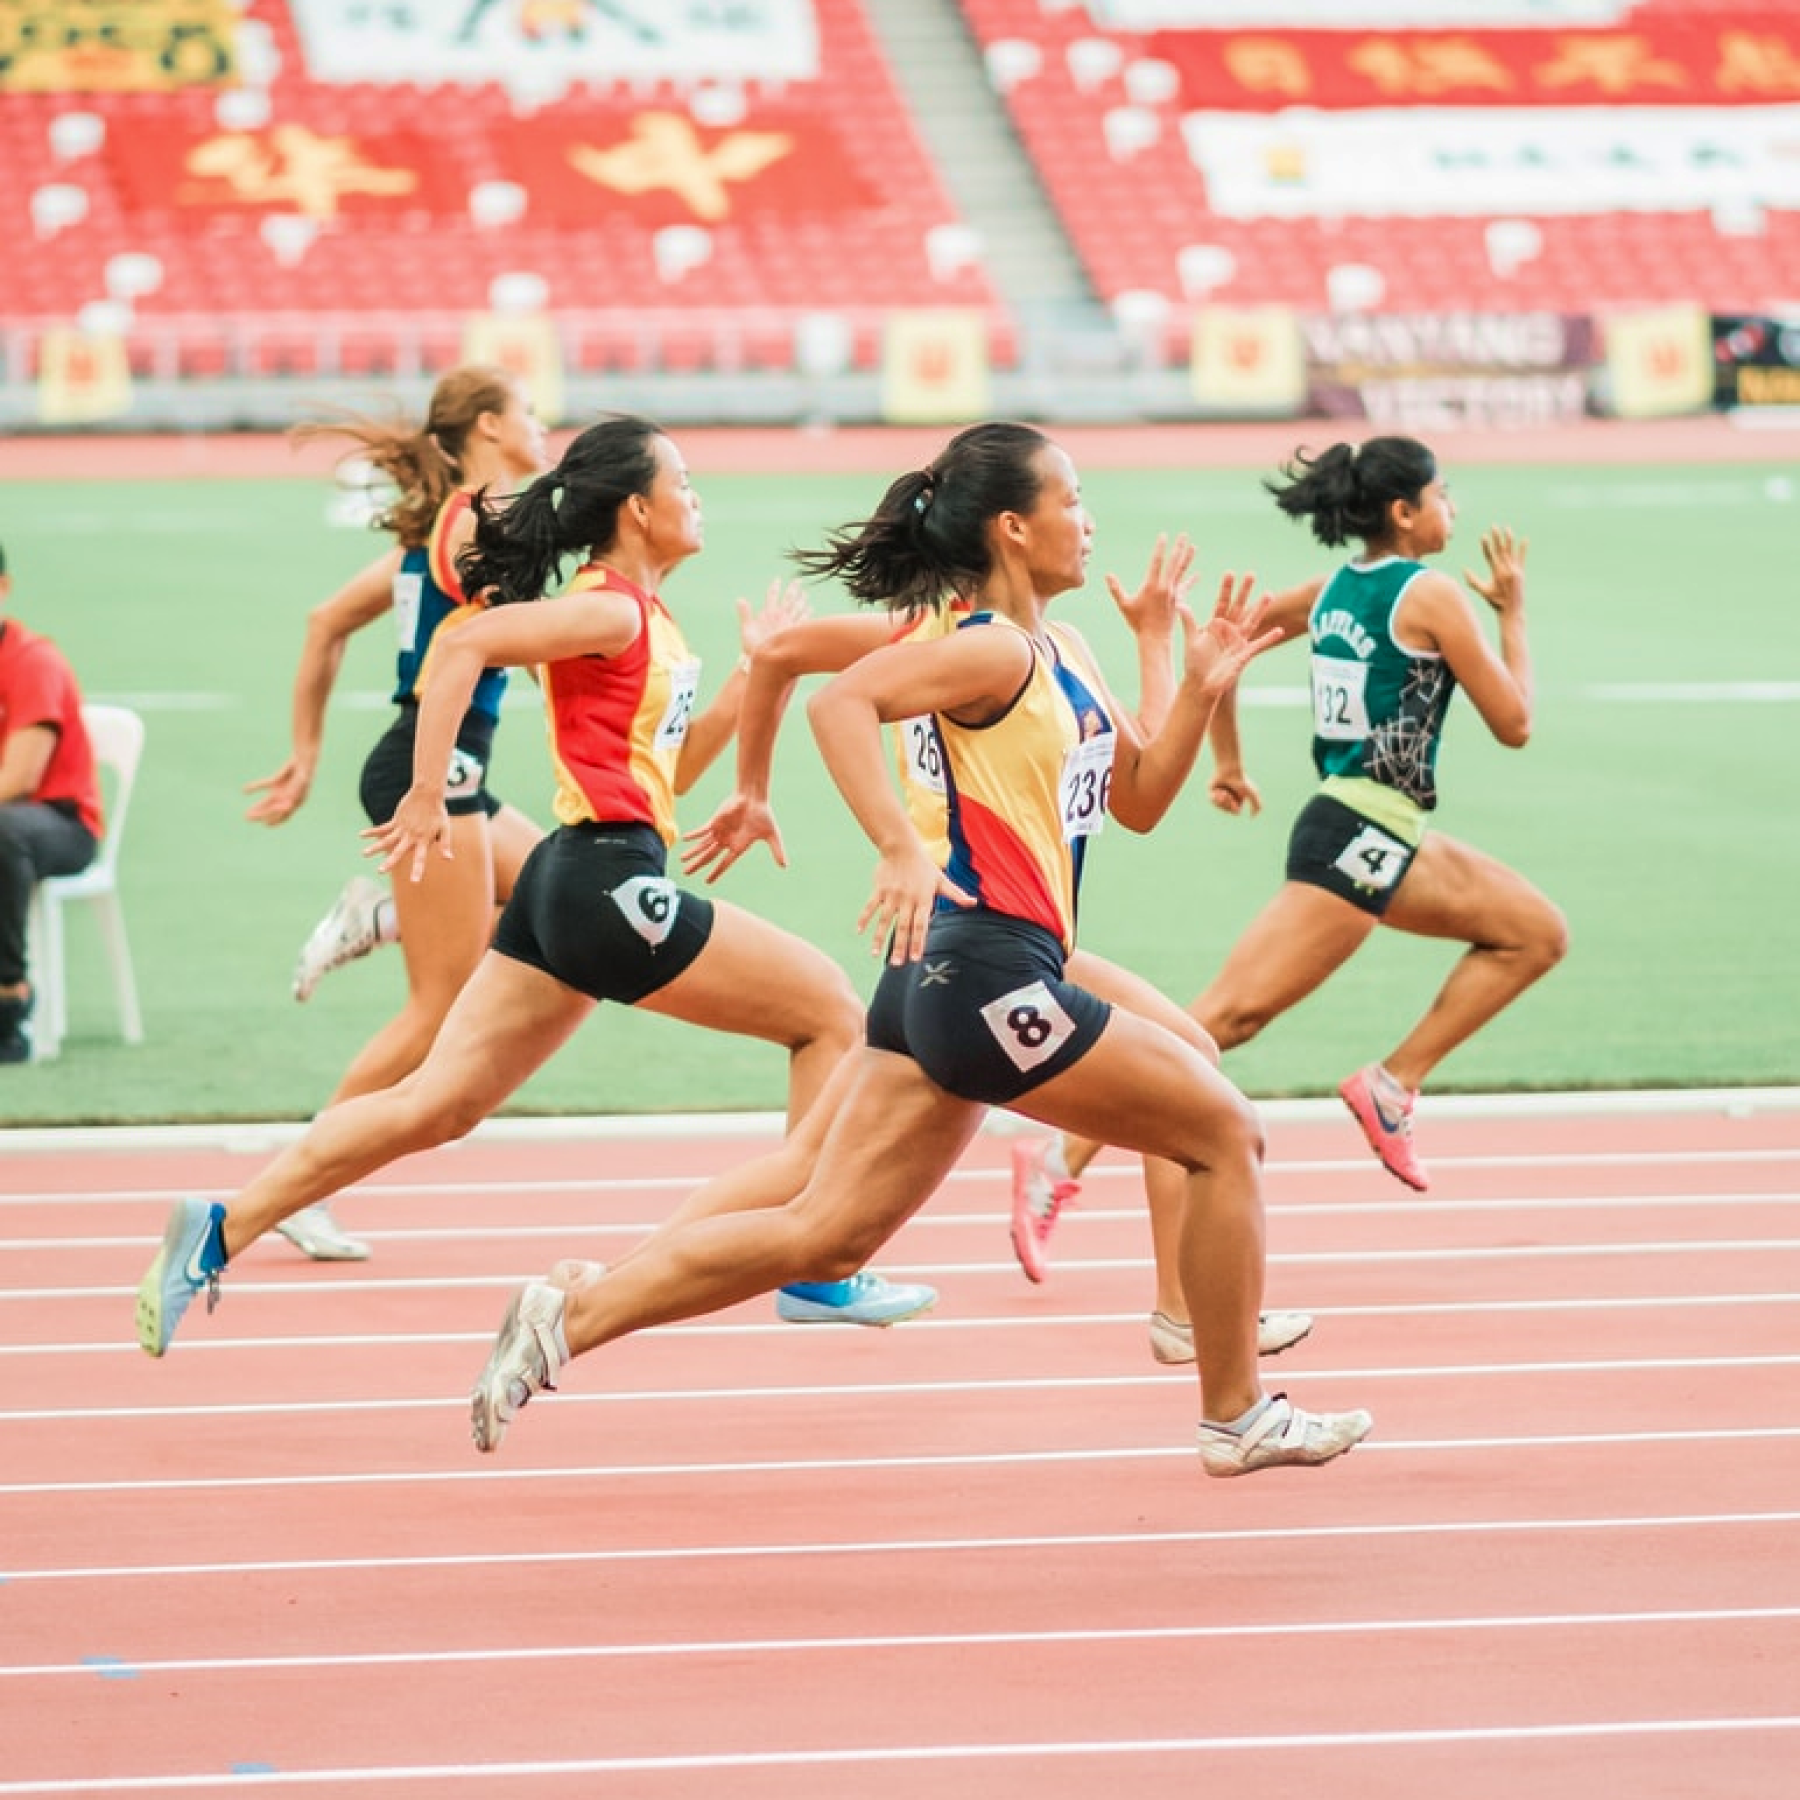 Track athletes running a race.